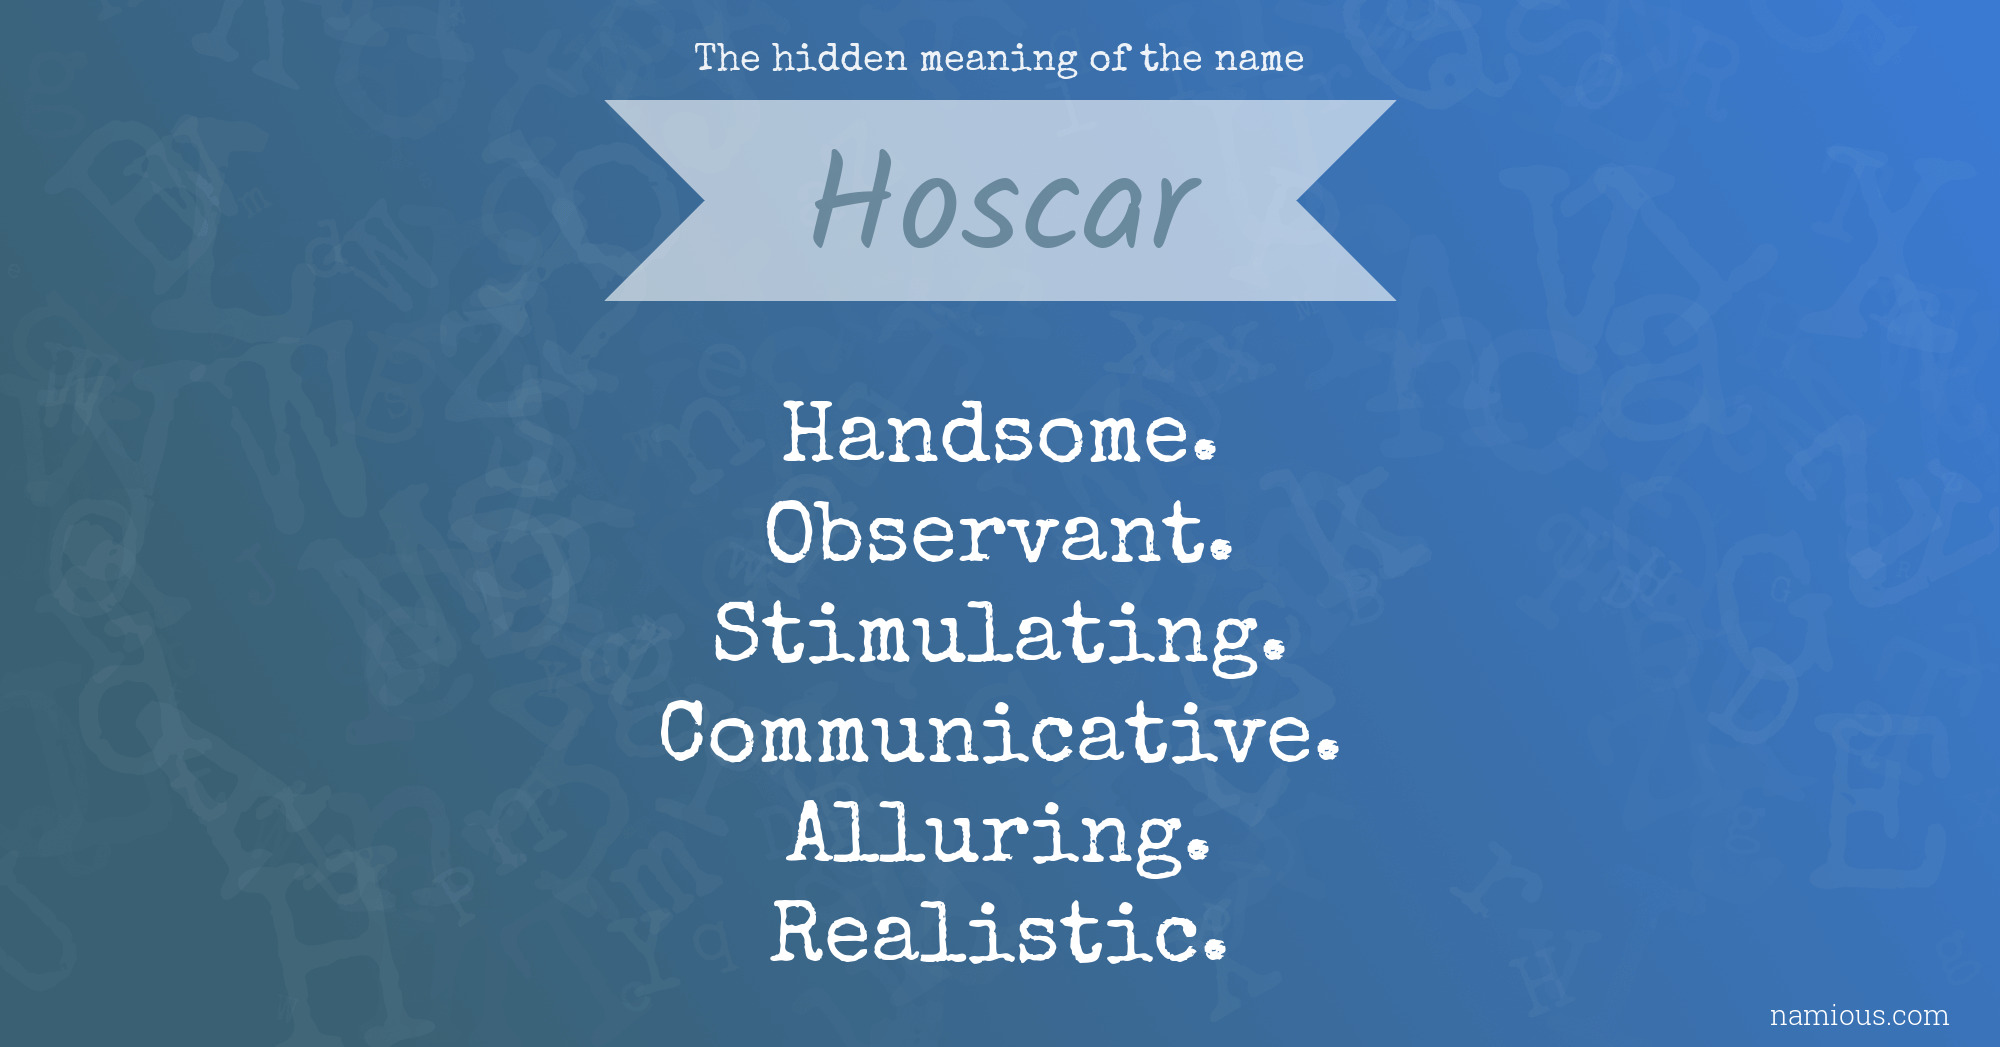 The hidden meaning of the name Hoscar